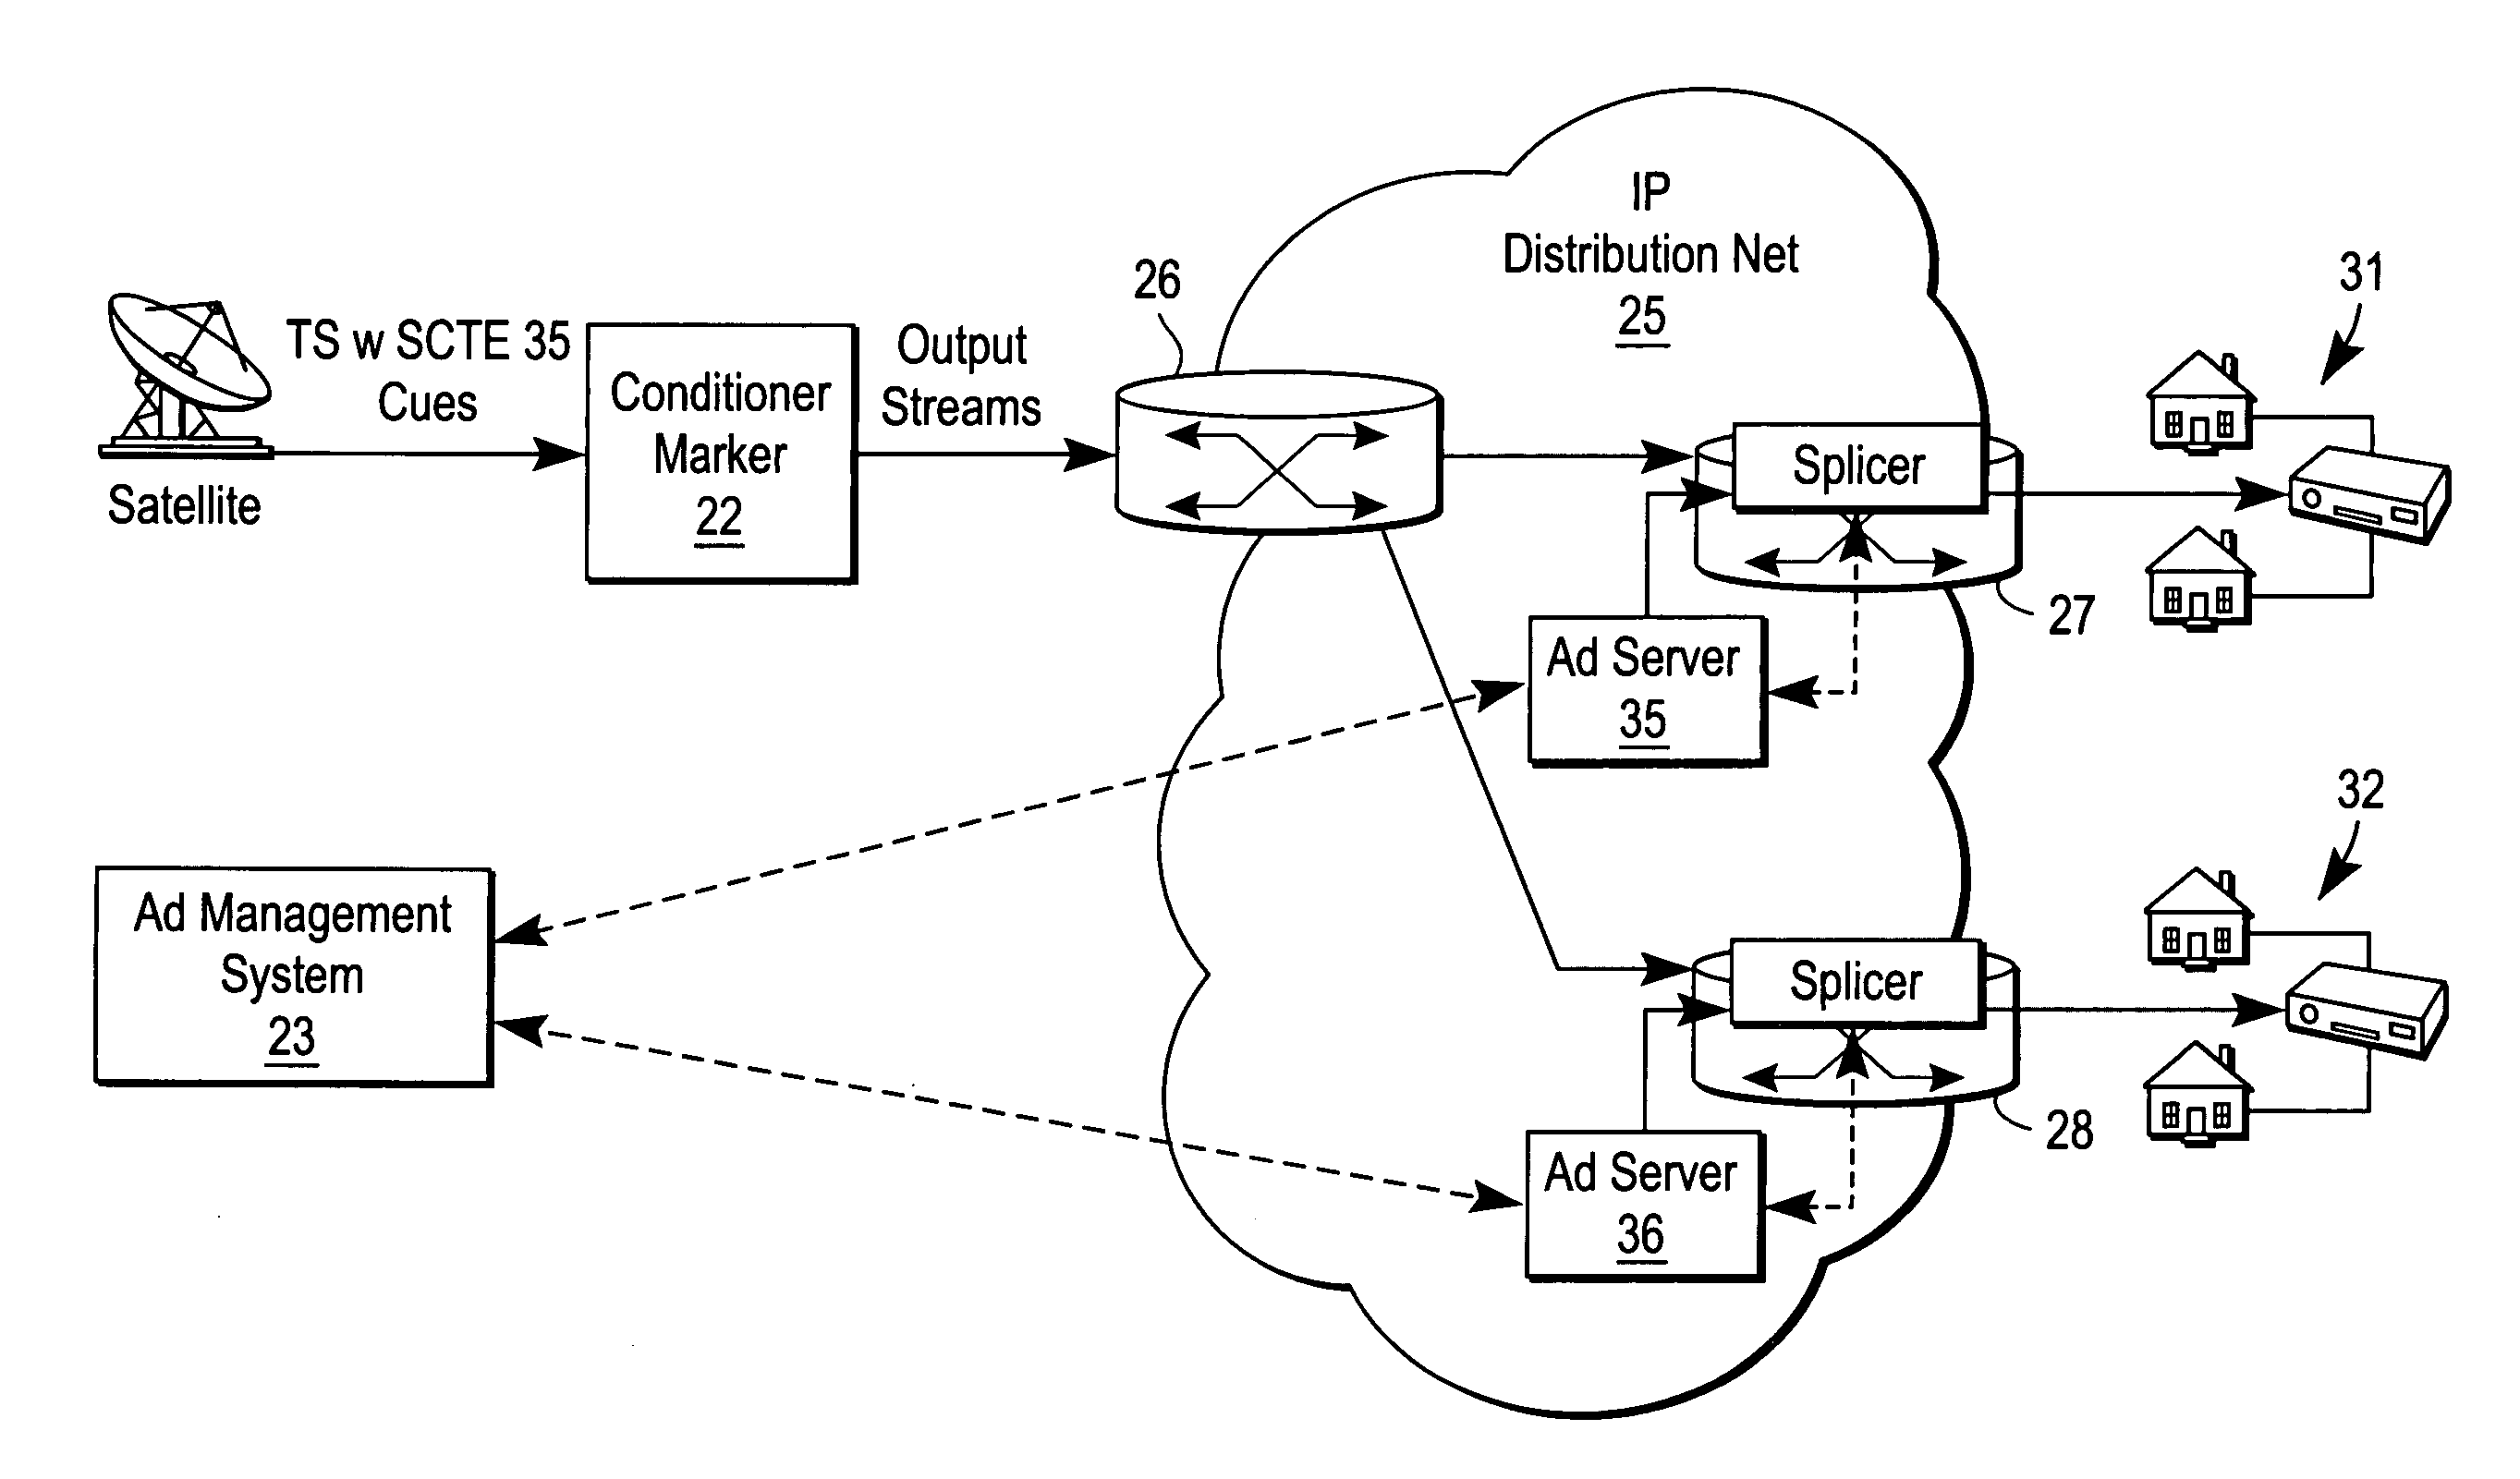 Distributed architecture for digital program insertion in video streams delivered over packet networks